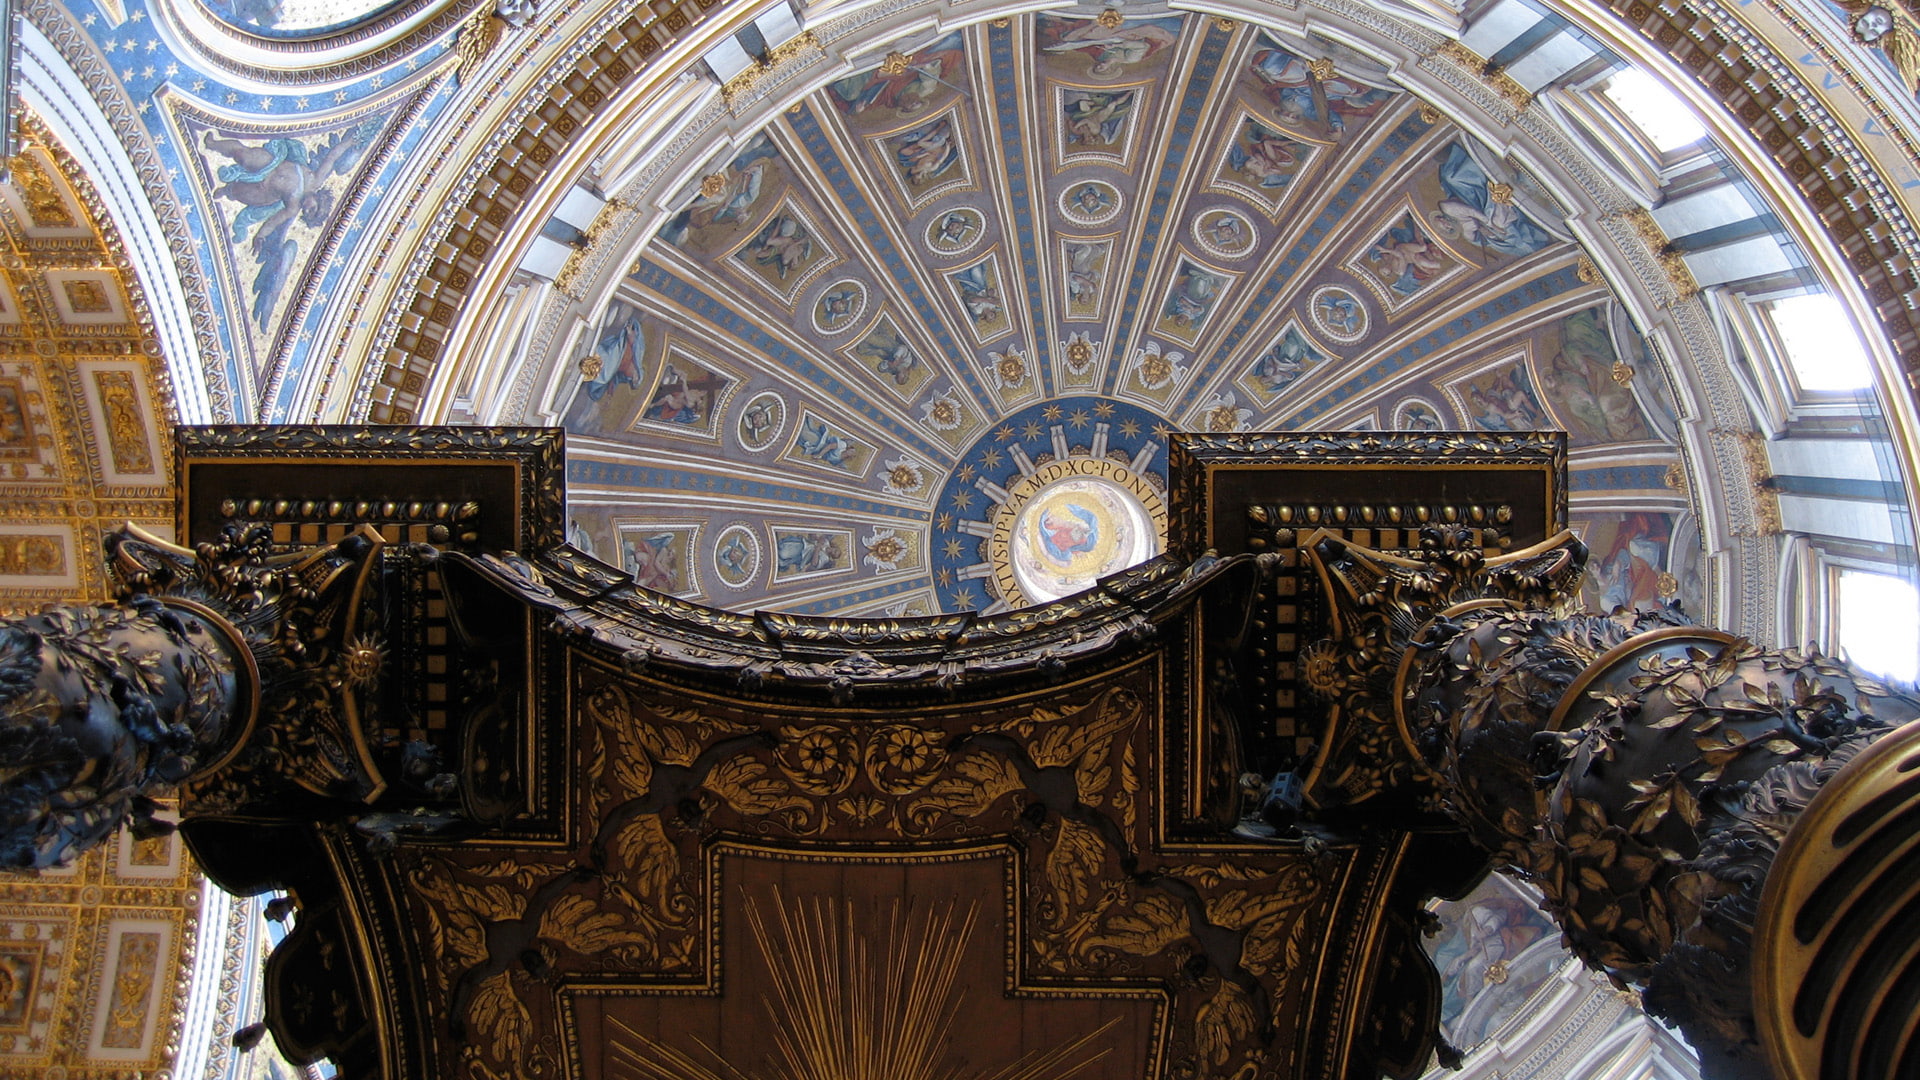 architecture, basilica, buildings, ceiling, churches, dome